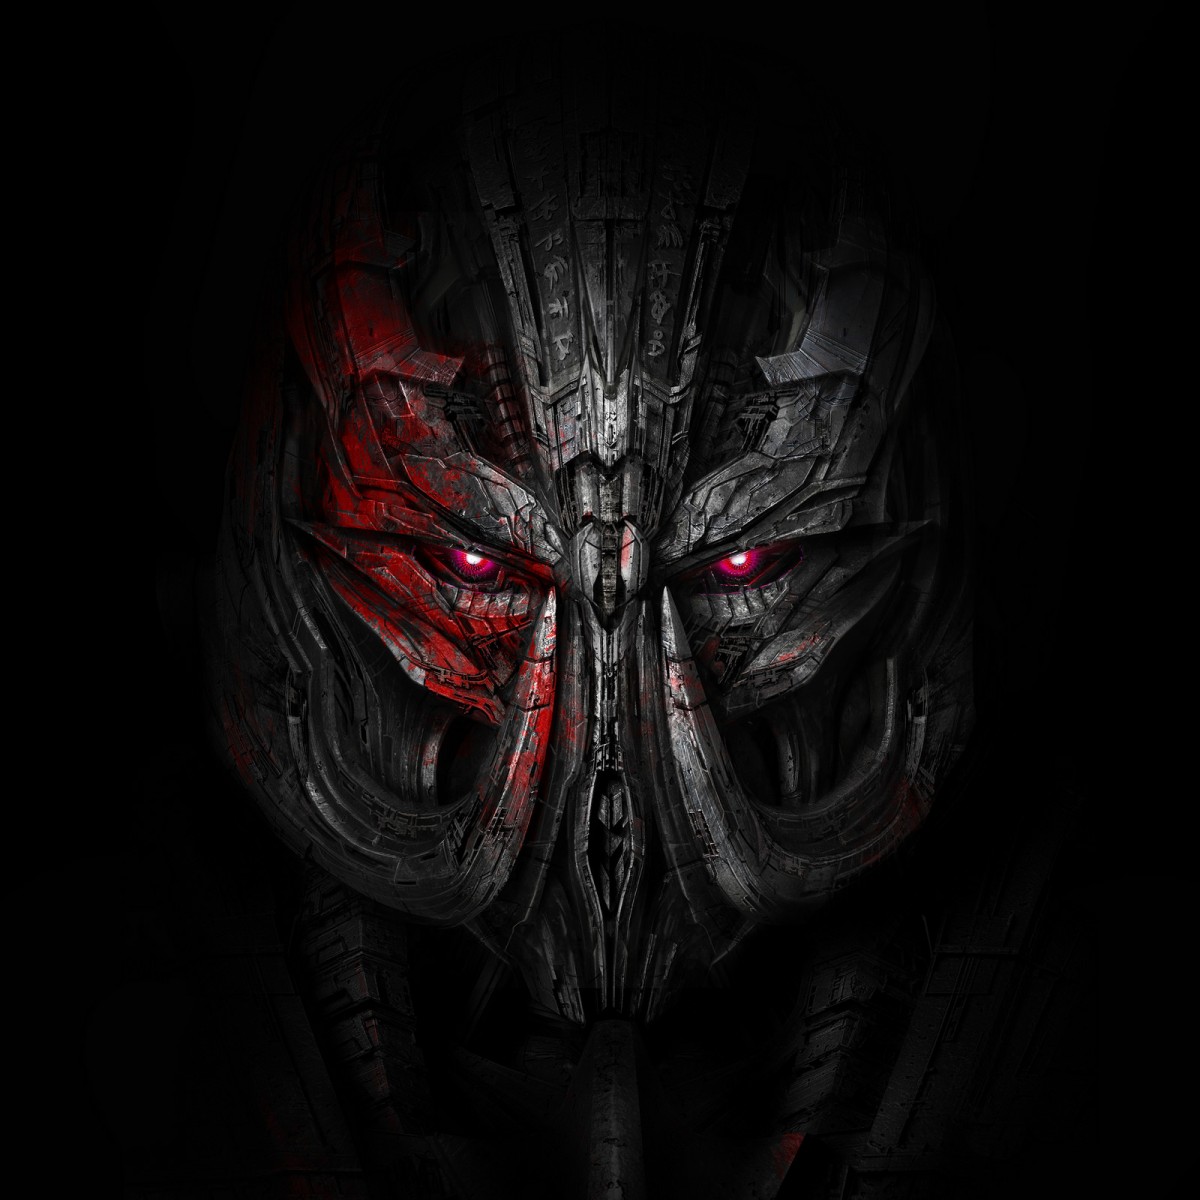 transformers-5-poster